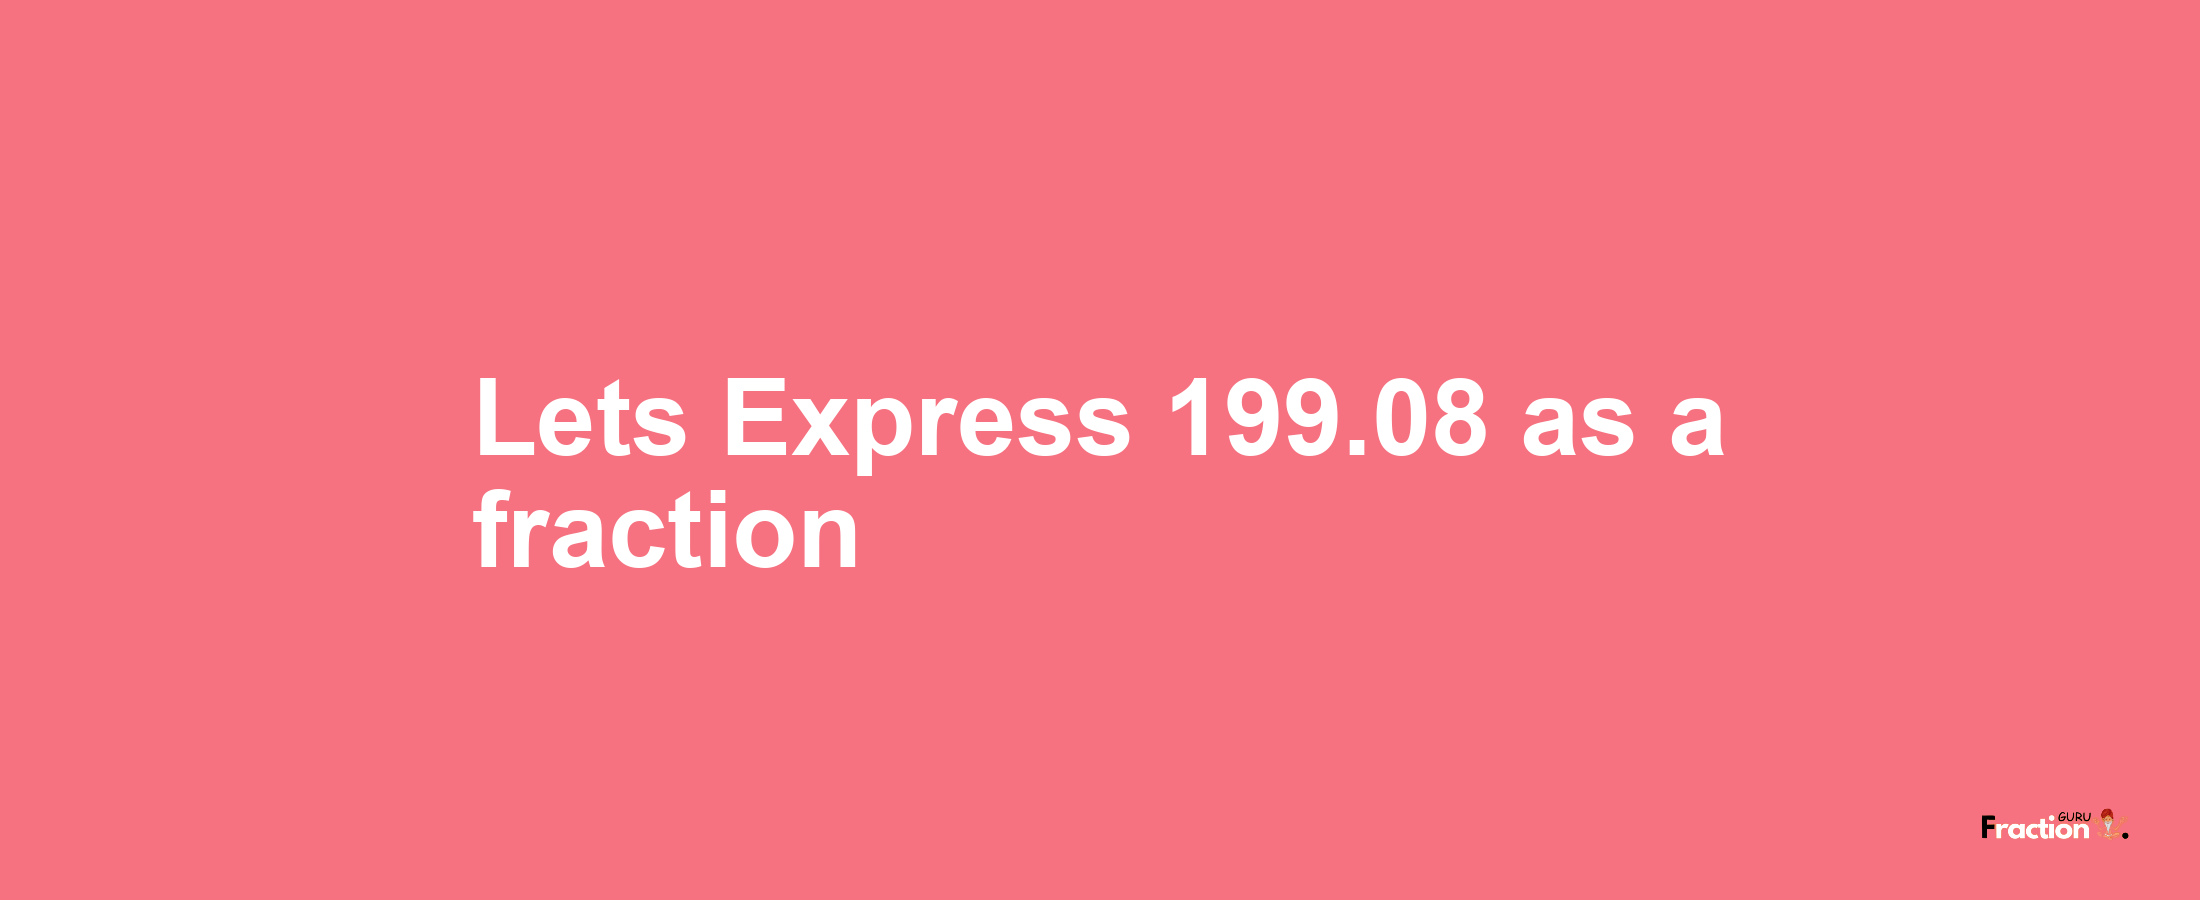 Lets Express 199.08 as afraction